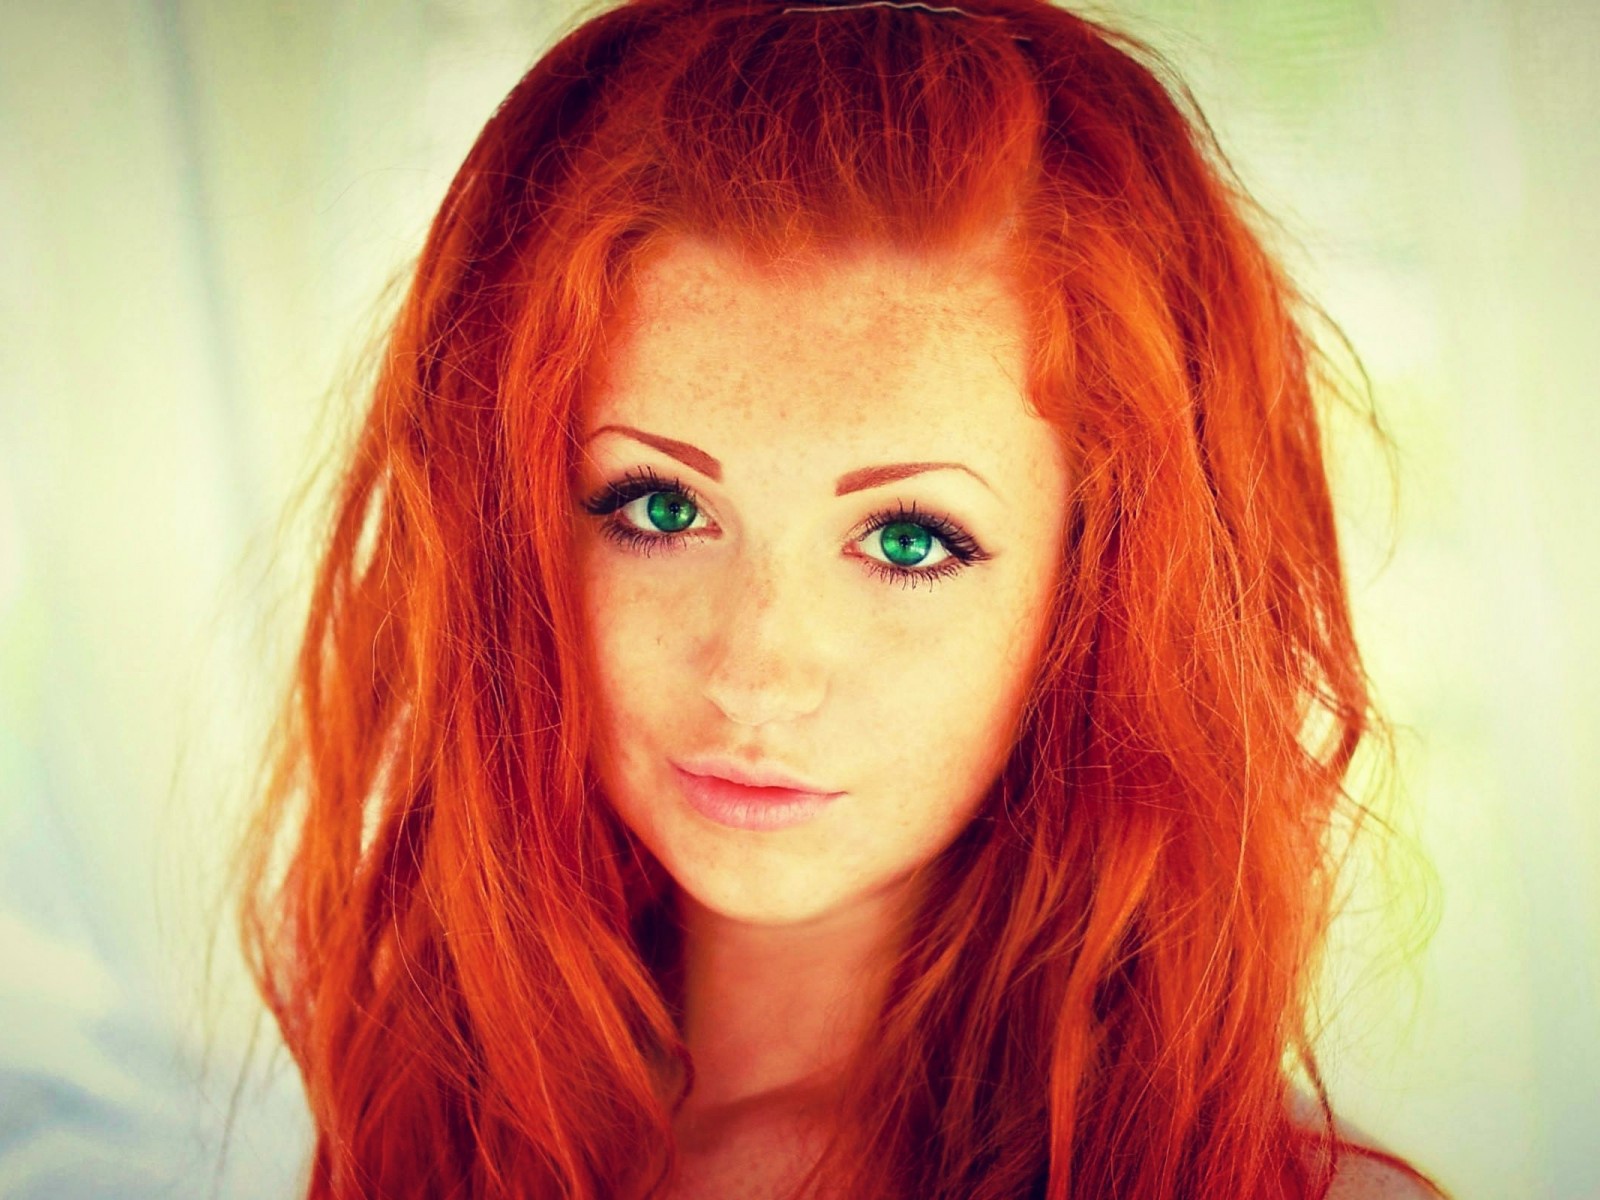 Red-haired, green-eyed girl